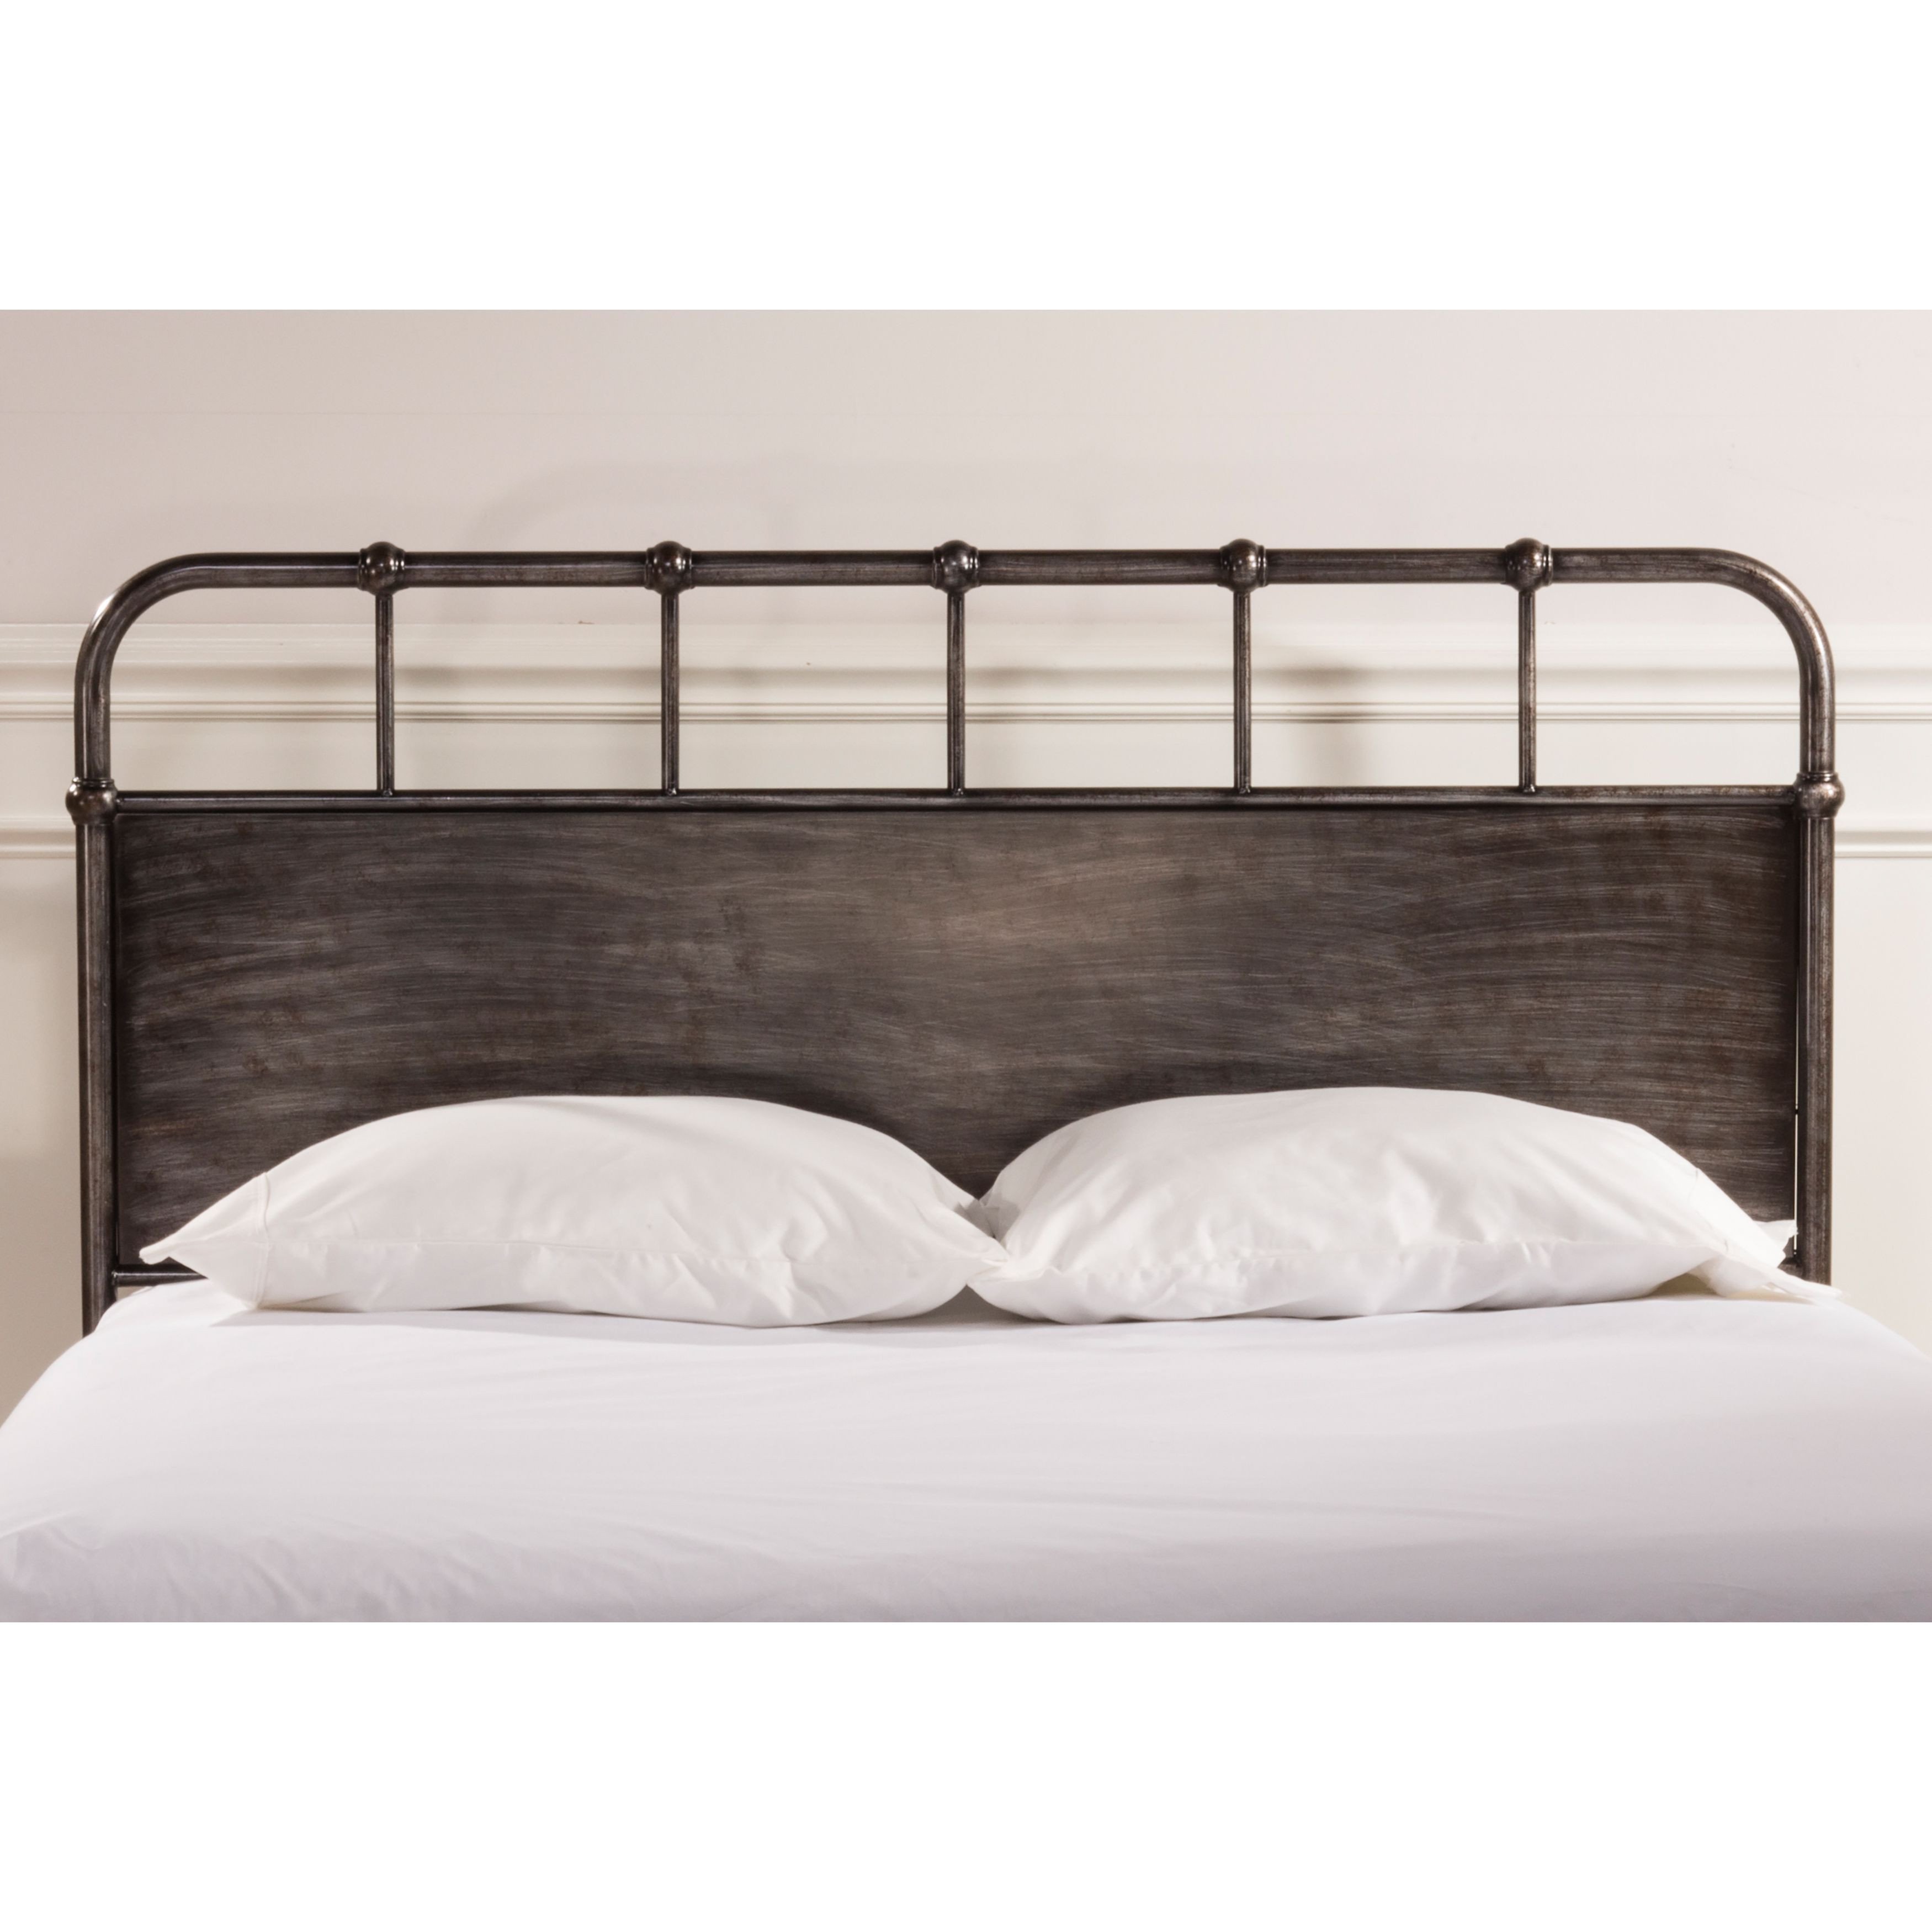 Industrial Style Bedroom Furniture Beautiful Grayson Industrial Rubbed Black Finish Metal Headboard with